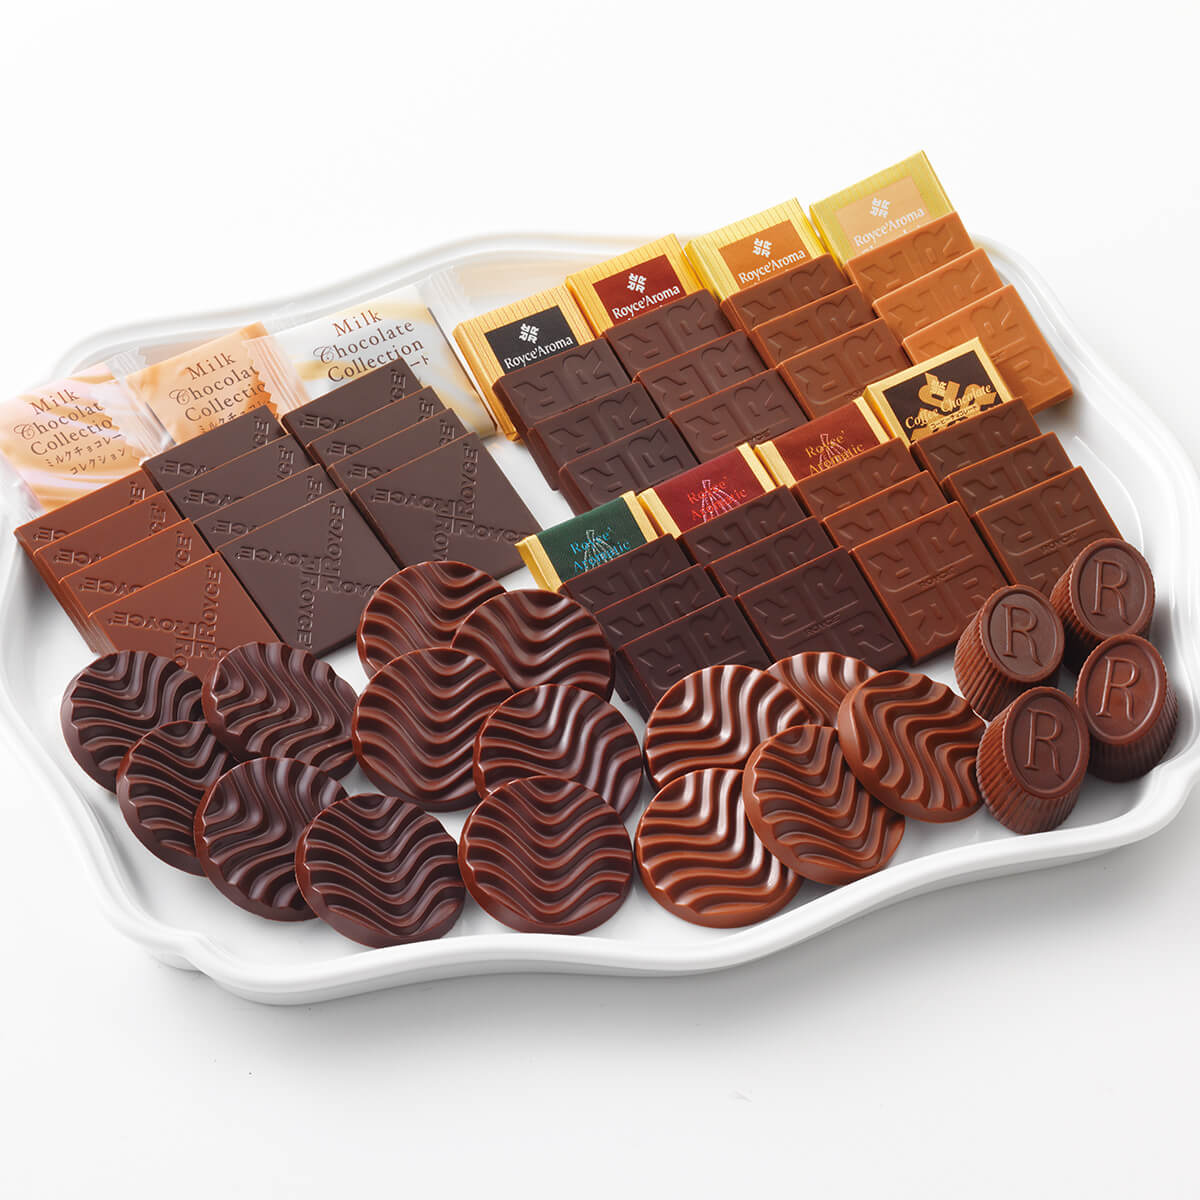 ROYCE' Chocolate - ROYCE' Tasting Box - Image shows different kinds of chocolates in various shapes, sizes, and colors. They are arranged on a white tray with curved details.